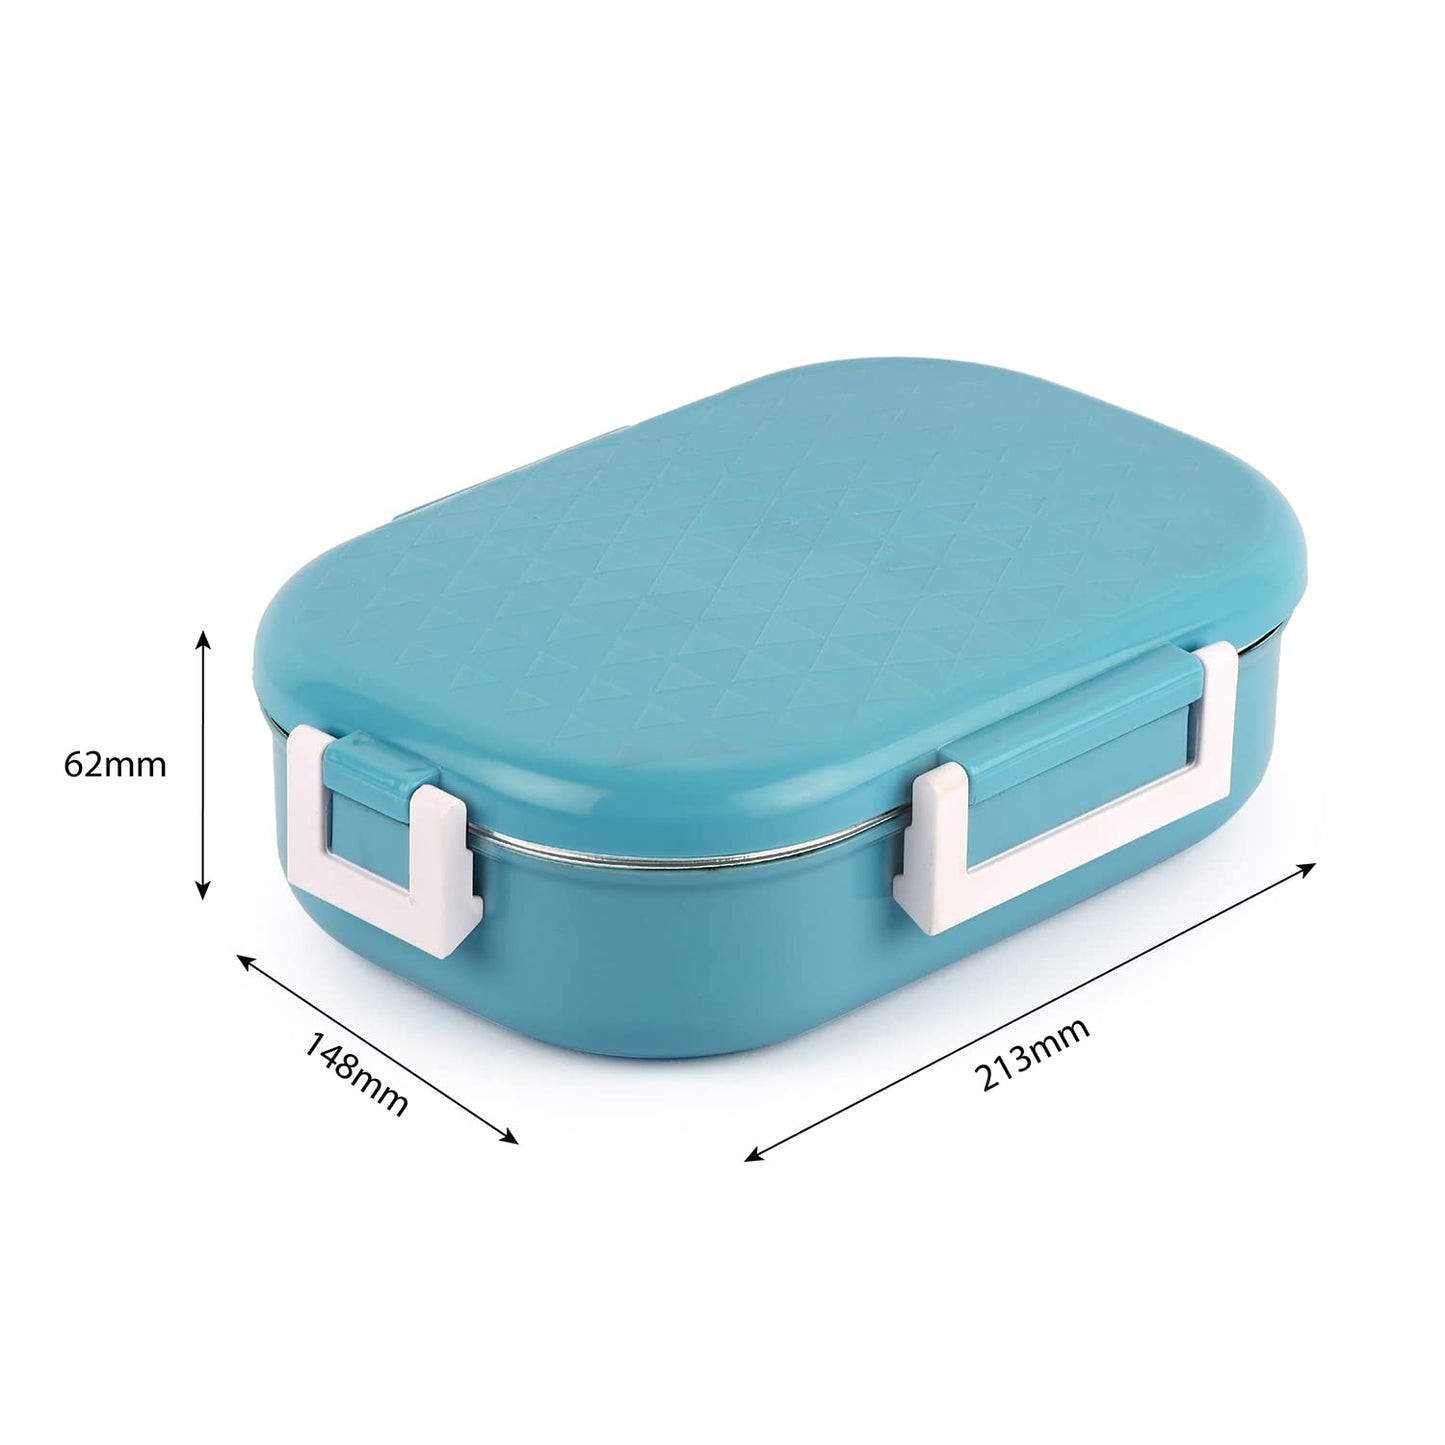 CELLO Altro Neo Lunch Box 700ml lunch box for kids and adult Neo Blue